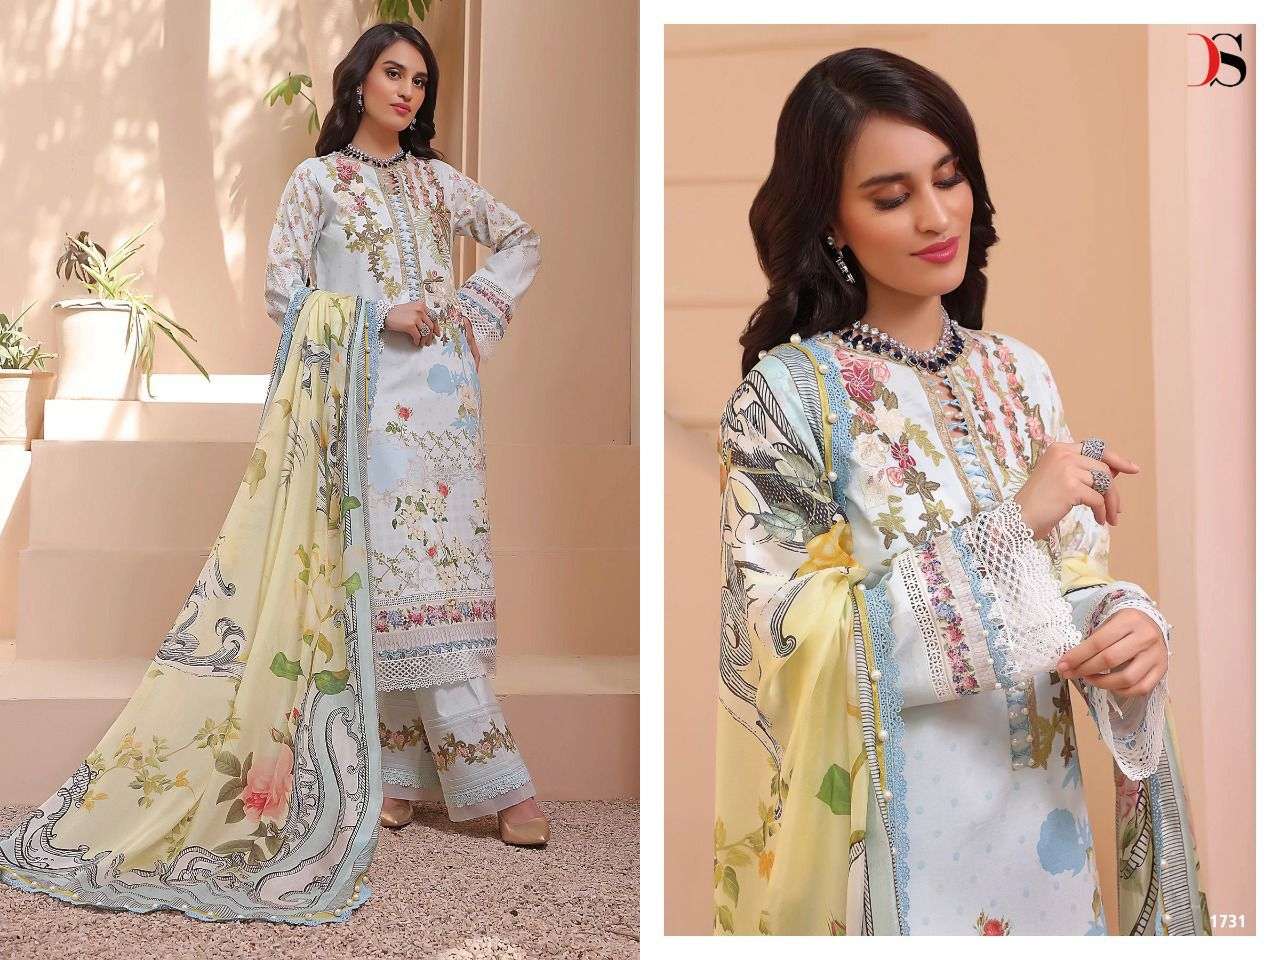 deepsy suits by firdous queens court 1731-1738 series cotton mal mal dupatta full suits online shopping surat